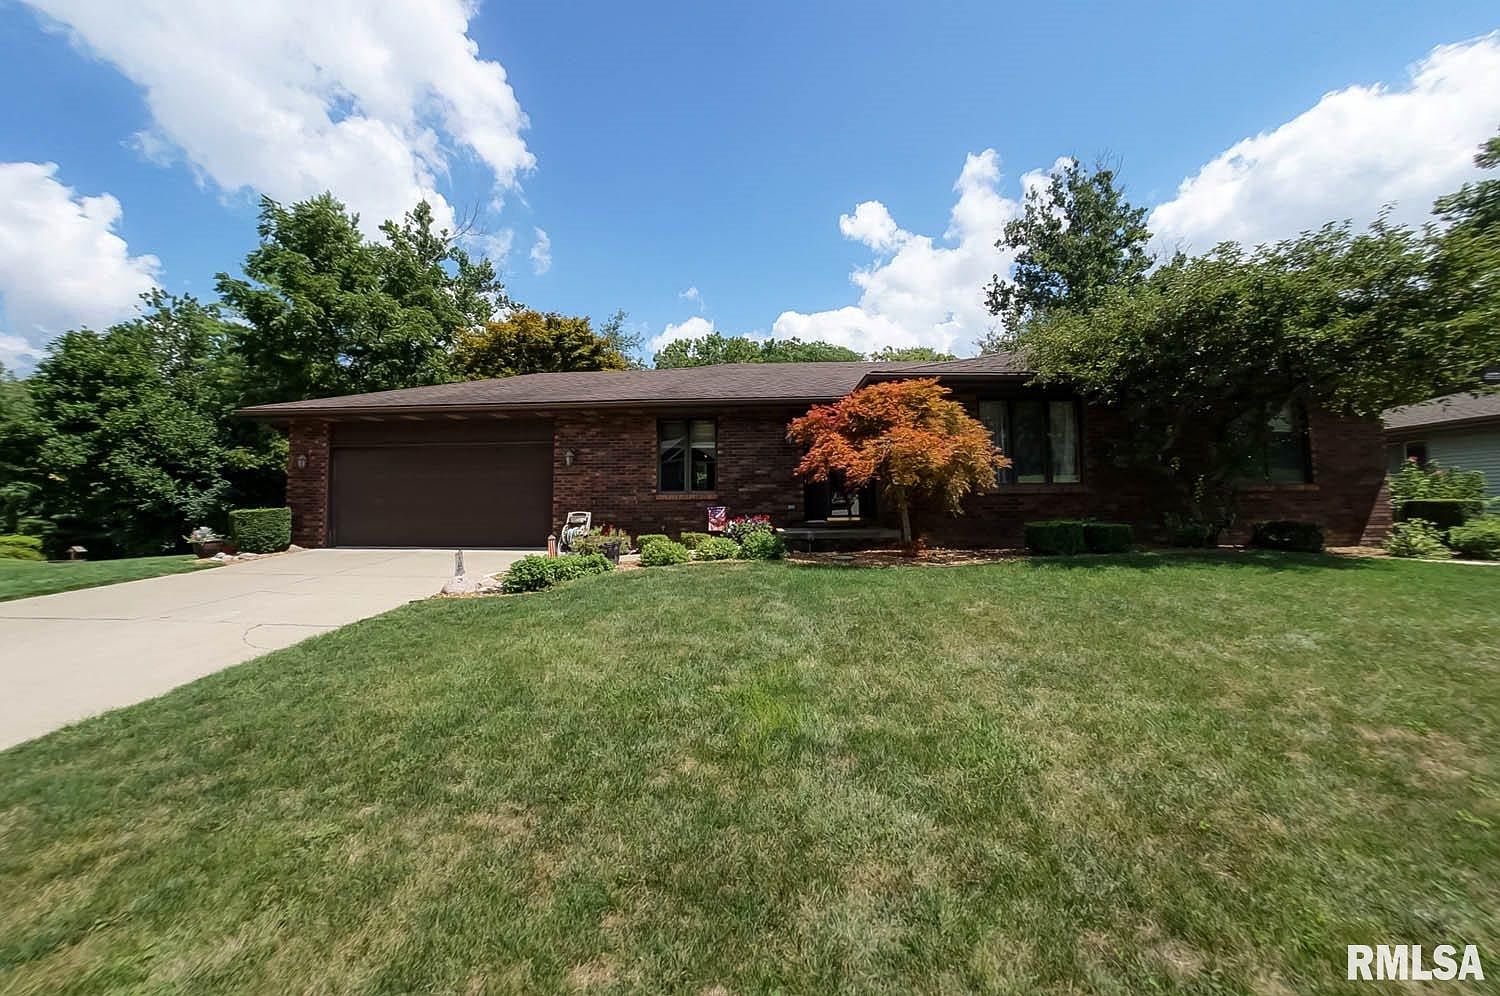 5 The Elms Springfield Il 62712 Zillow